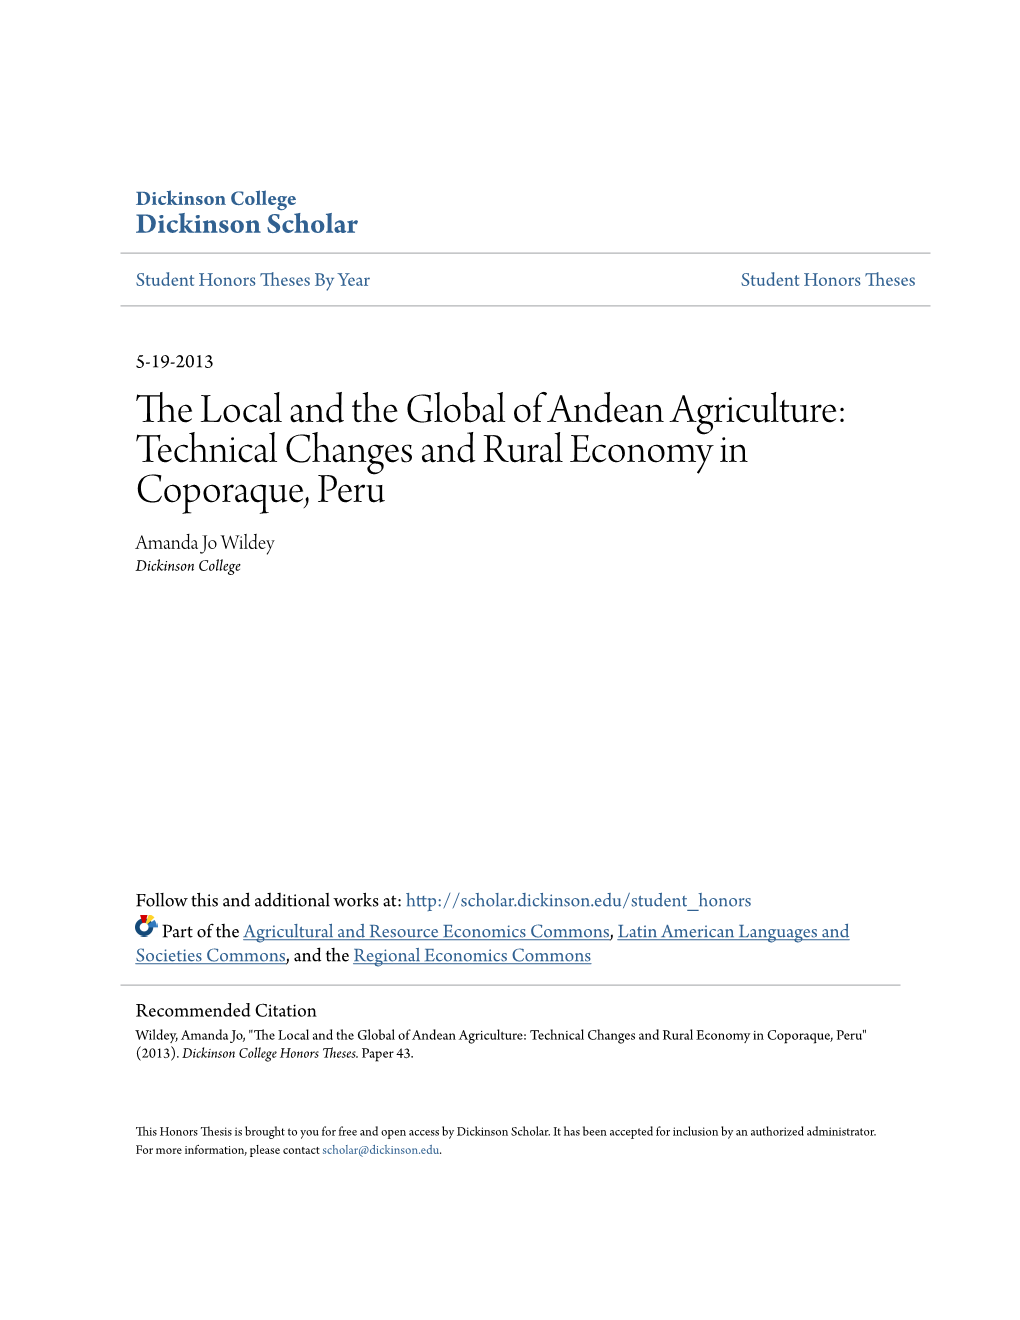 The Local and the Global of Andean Agriculture: Technical Changes and Rural Economy in Coporaque, Peru Amanda Jo Wildey Dickinson College